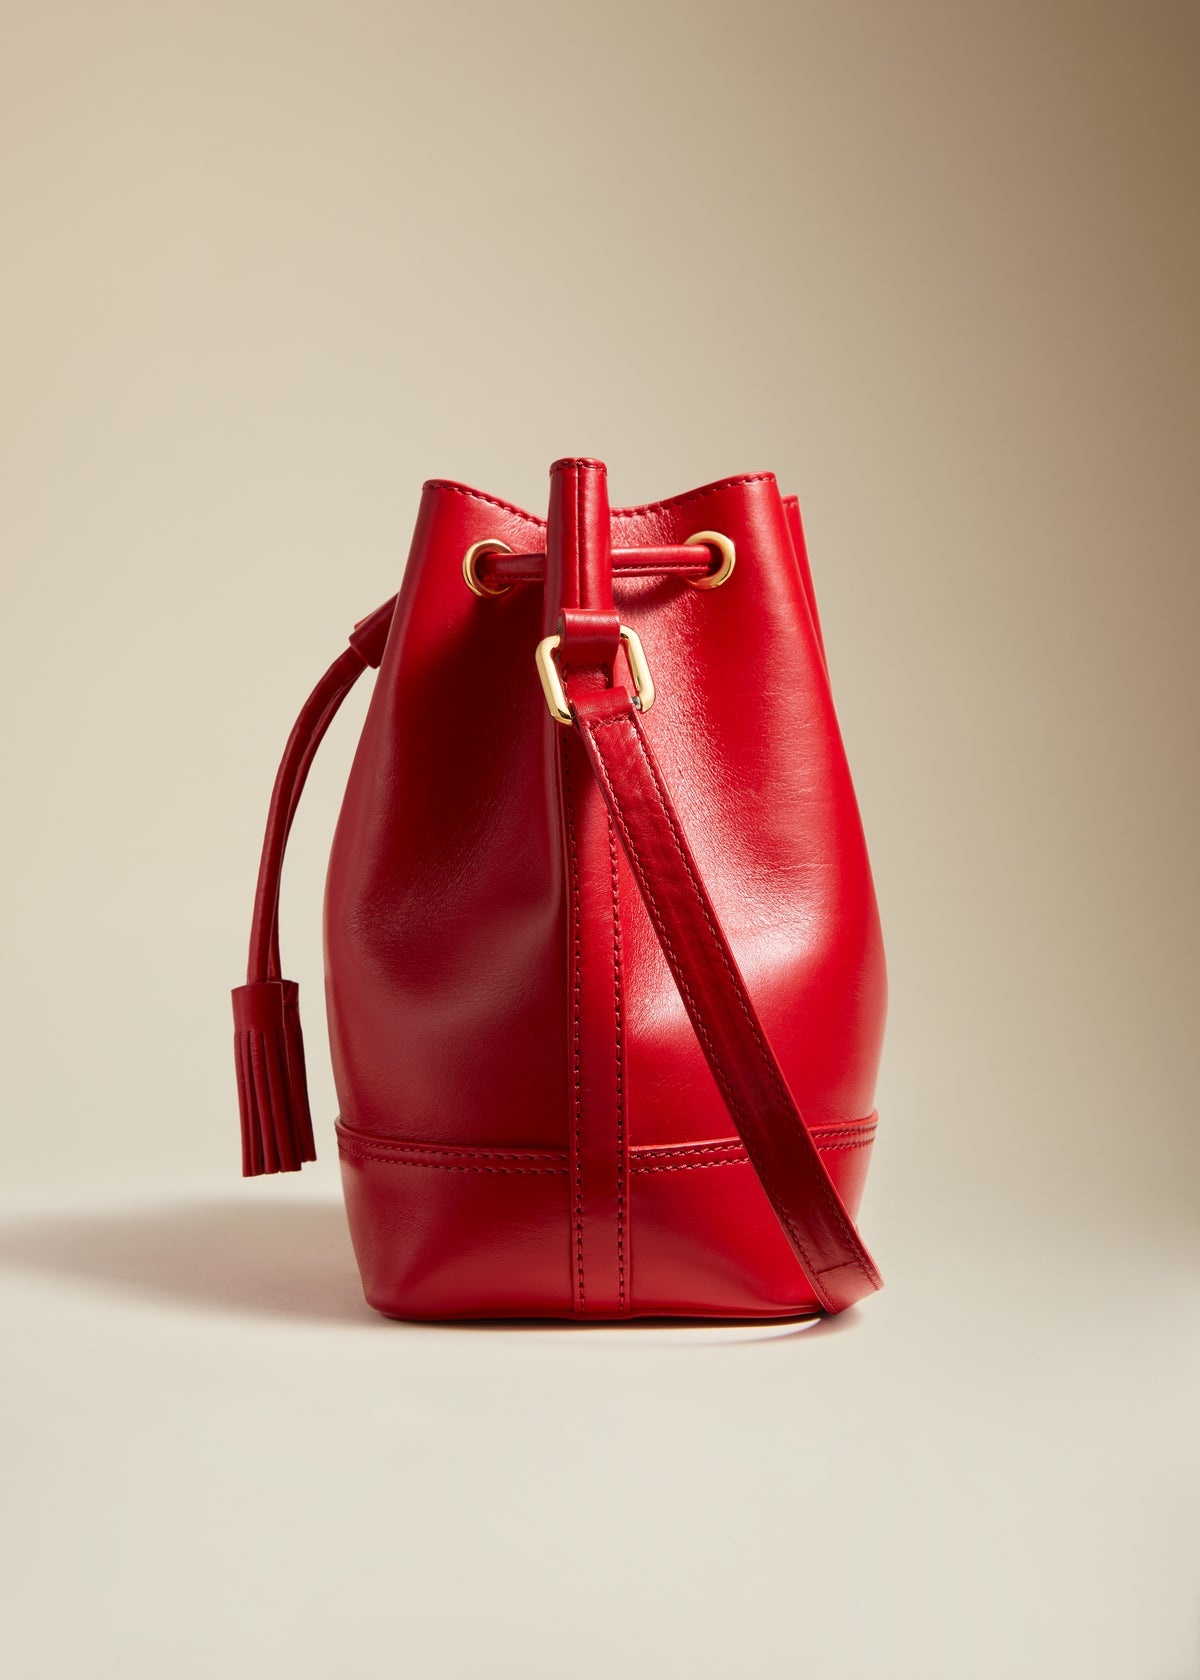 The Small Cecilia Crossbody Bag in Scarlet Leather - 2